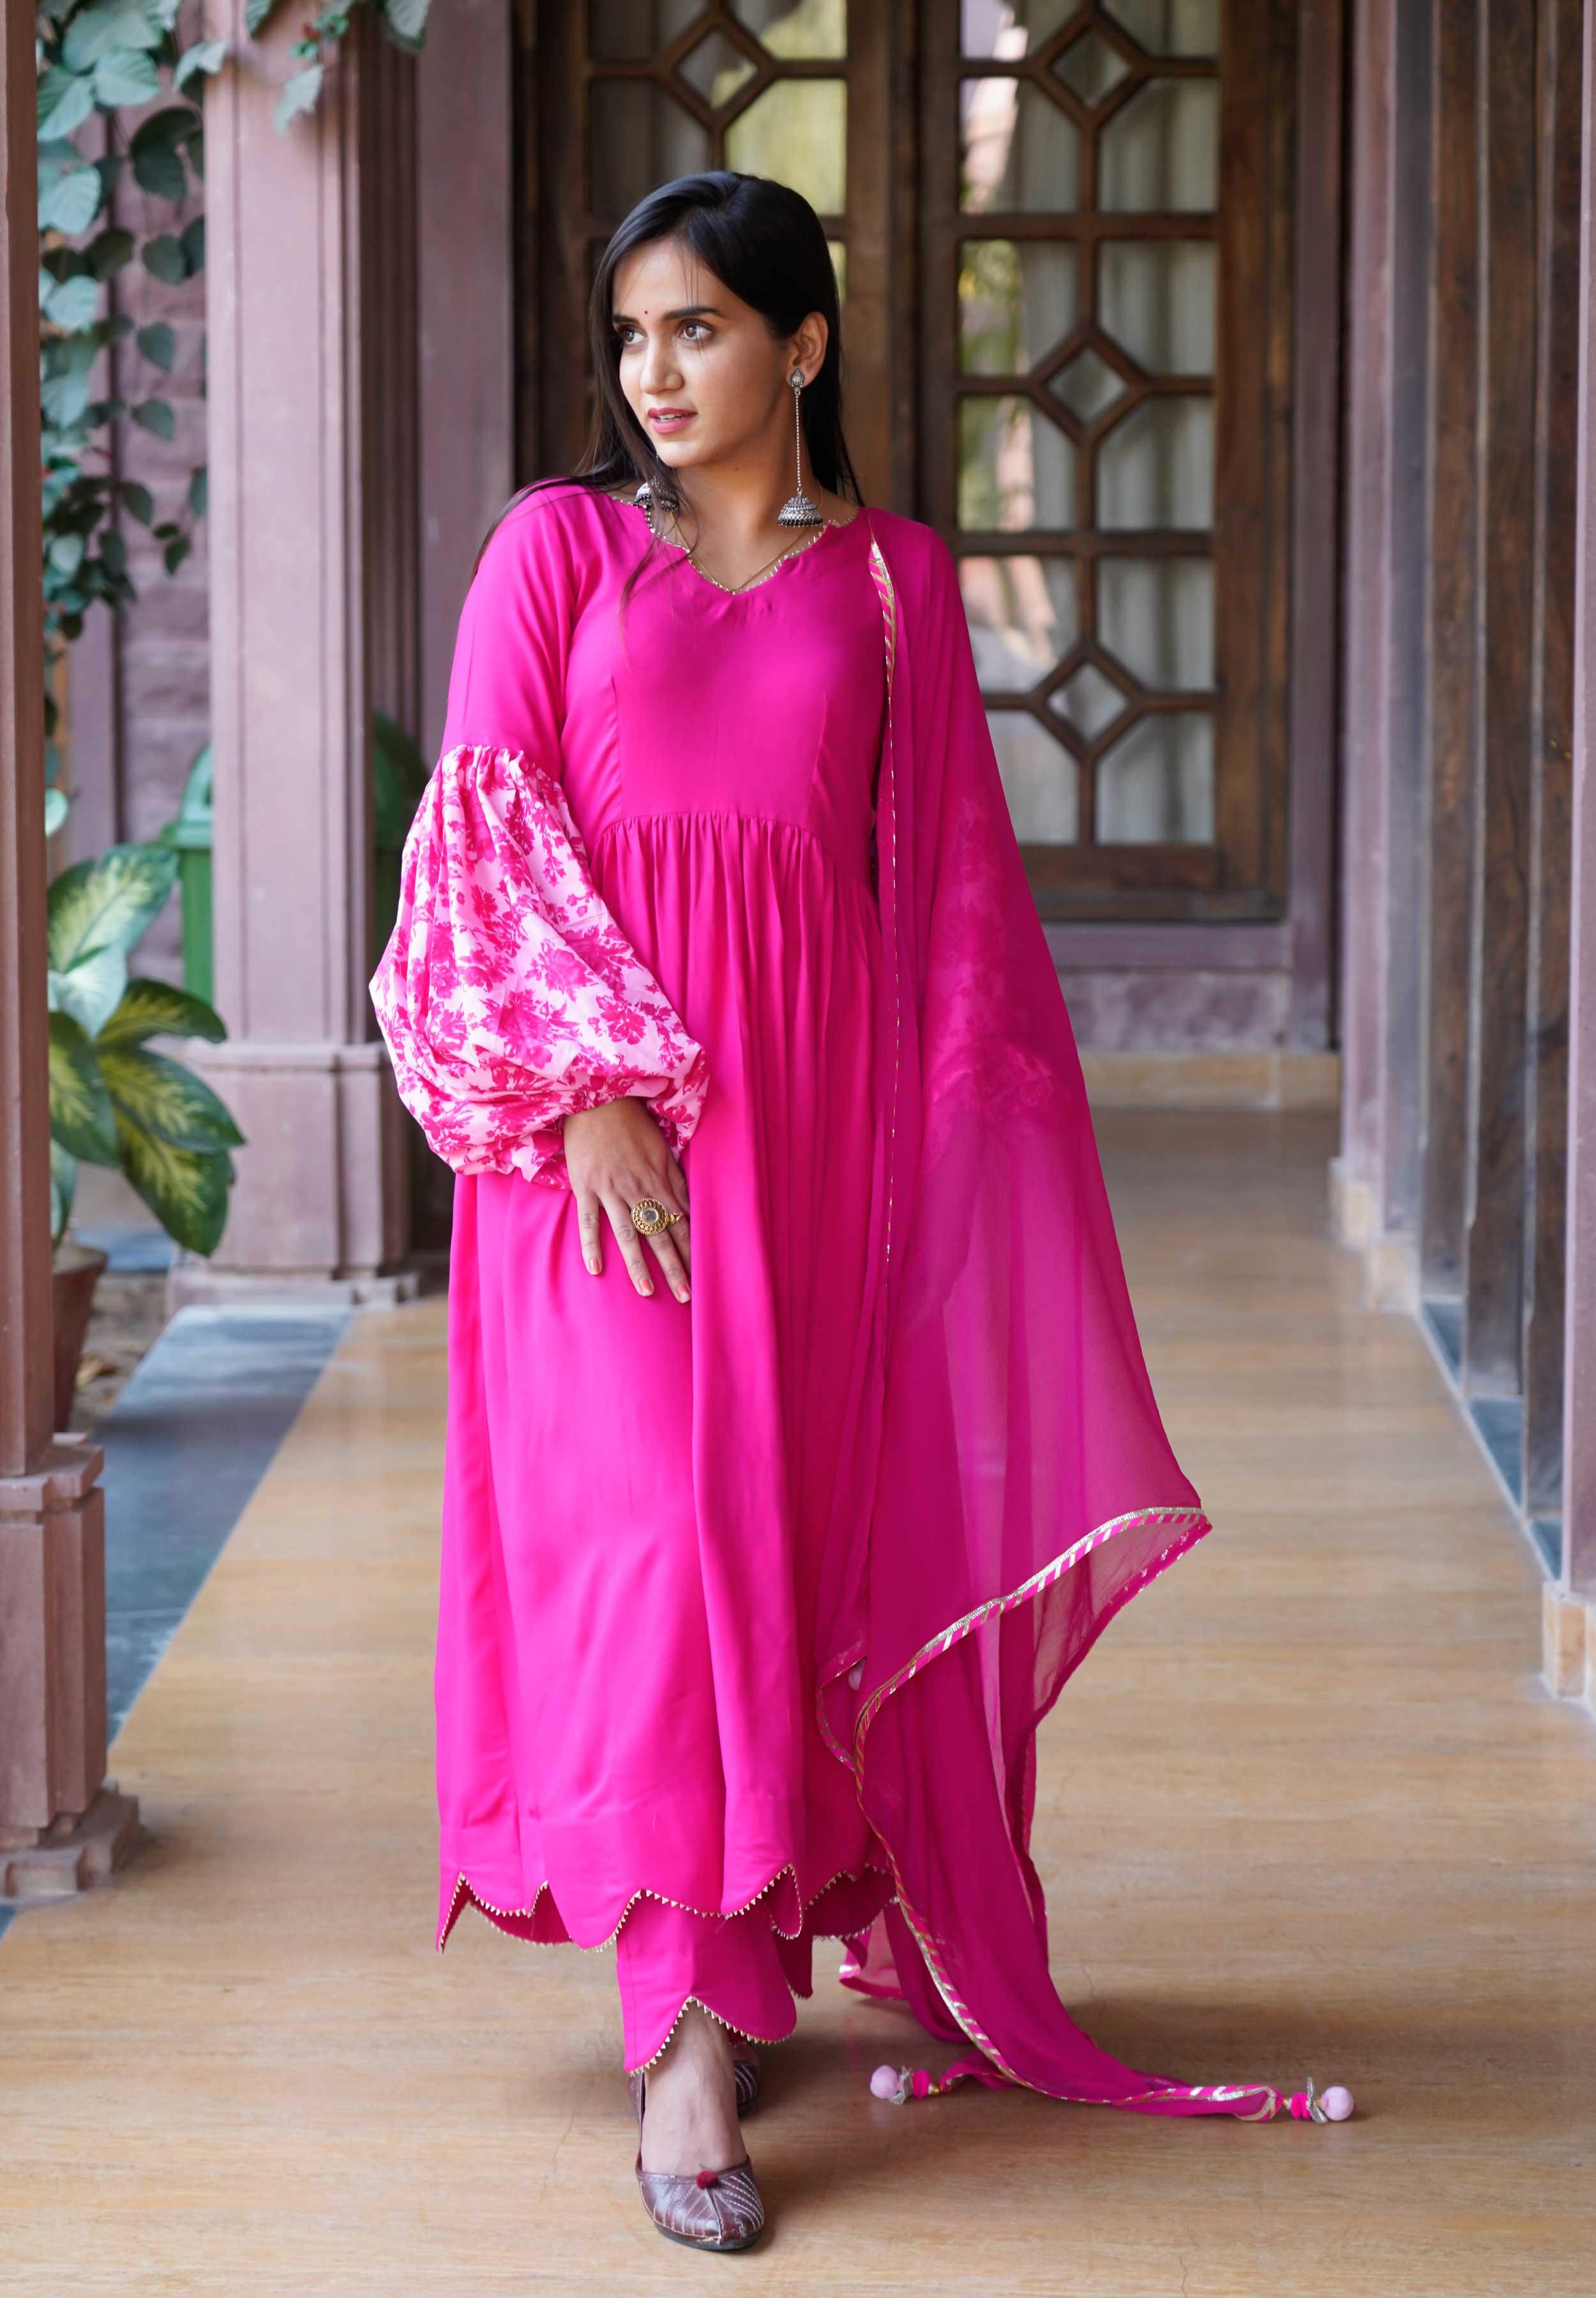 Buy White and Pink Combination Cotton Salwar Suit at Amazon.in